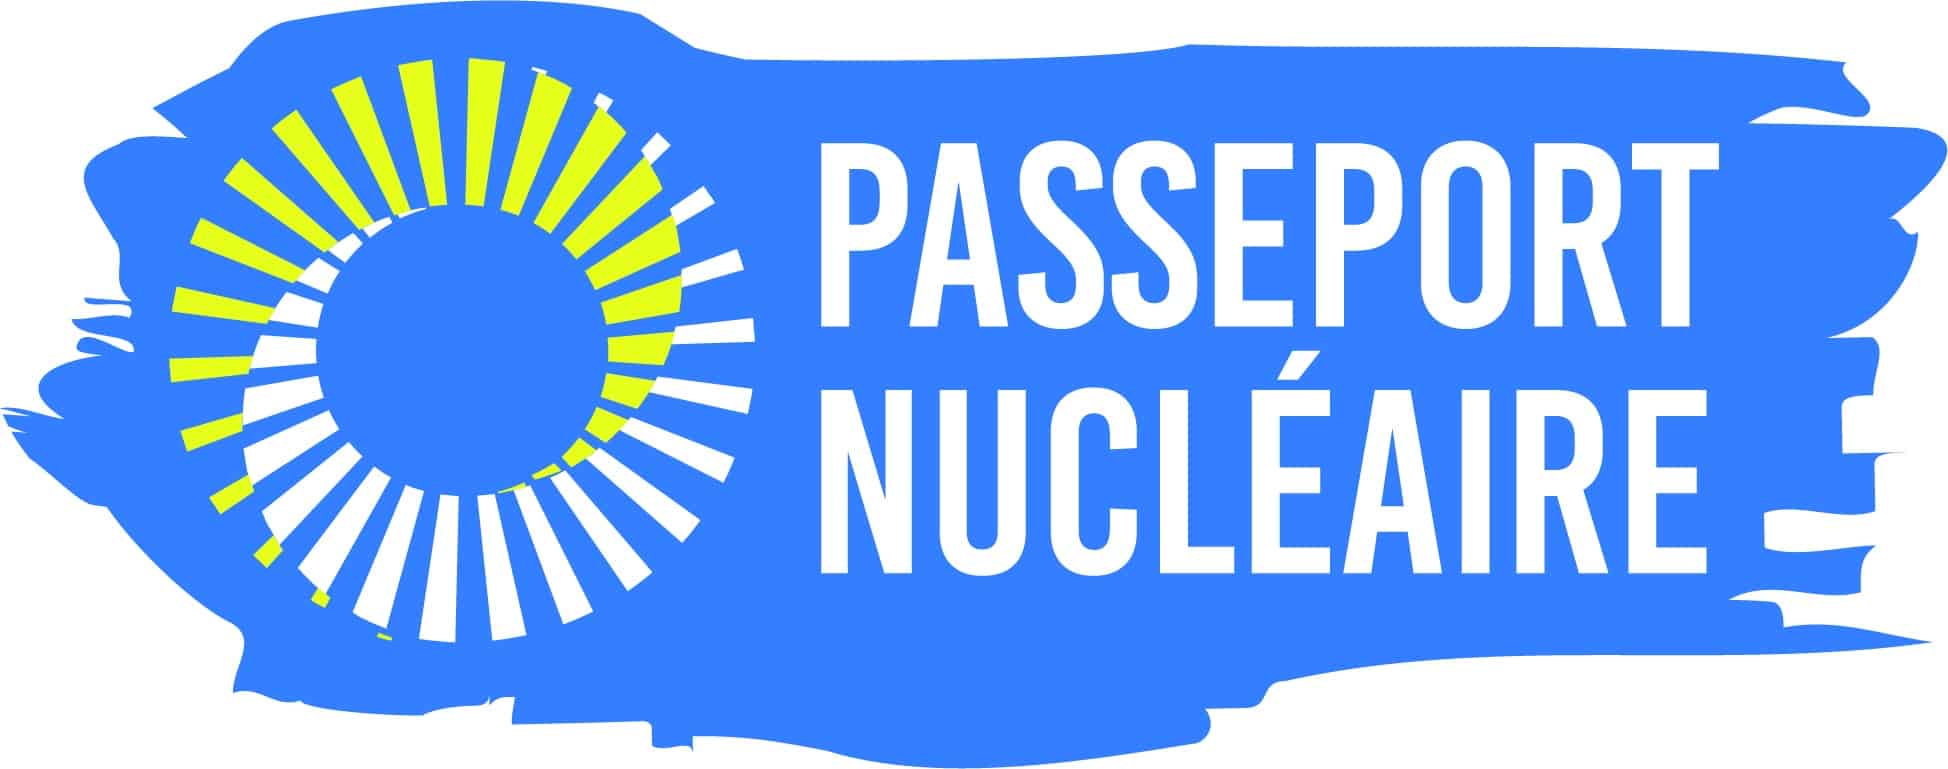 ID passeport nucleaire high